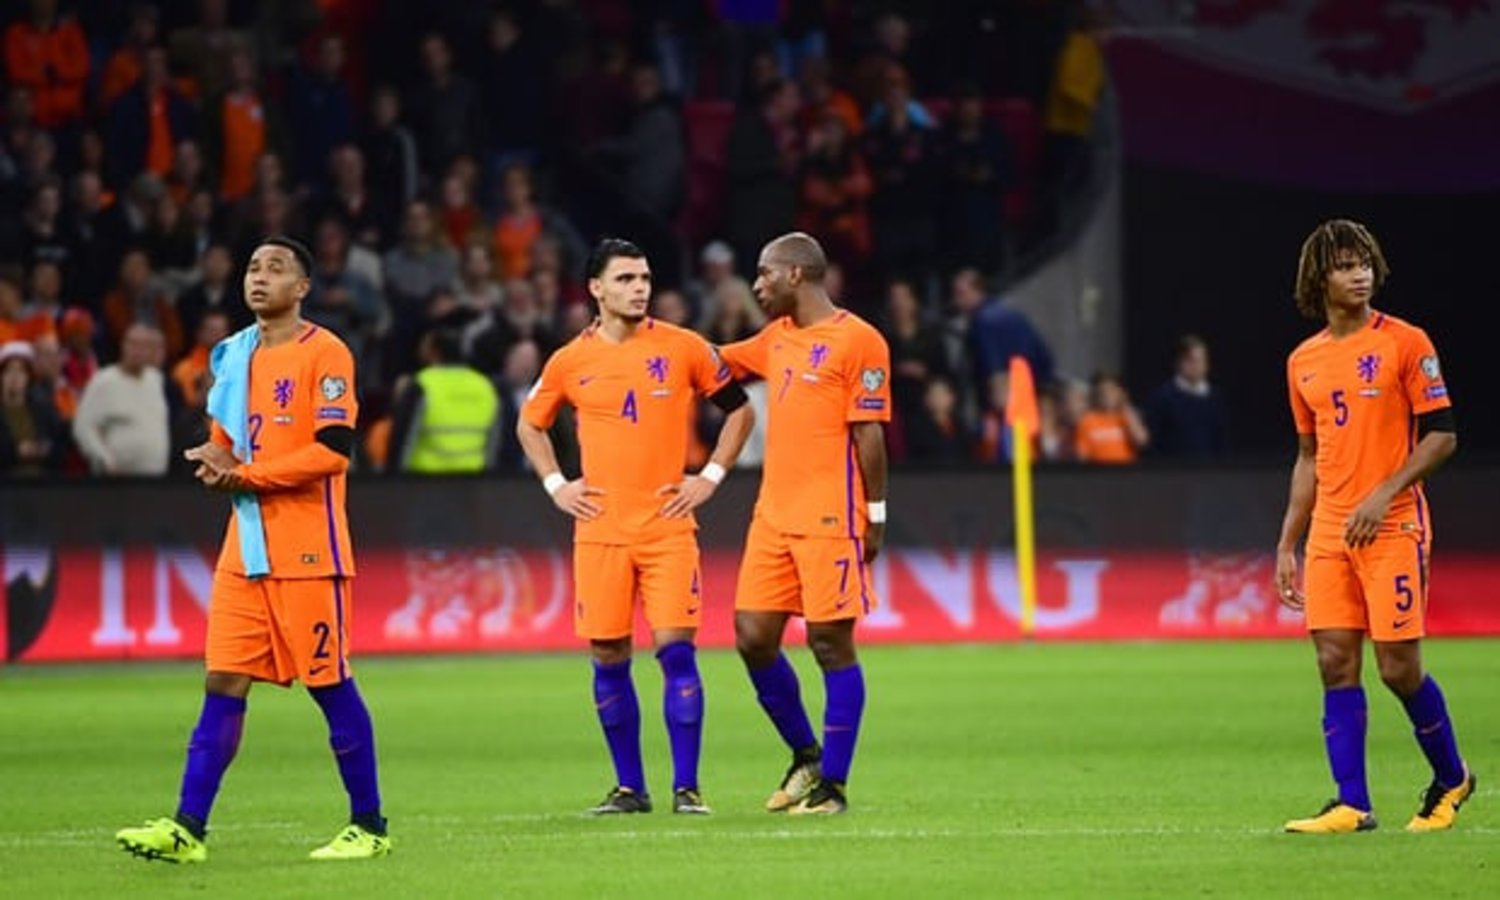  The Holland players react to the disappointment of failing to qualify for their second major football tournament in a row. Photograph: Emmanuel Dunand/AFP/Getty Images  